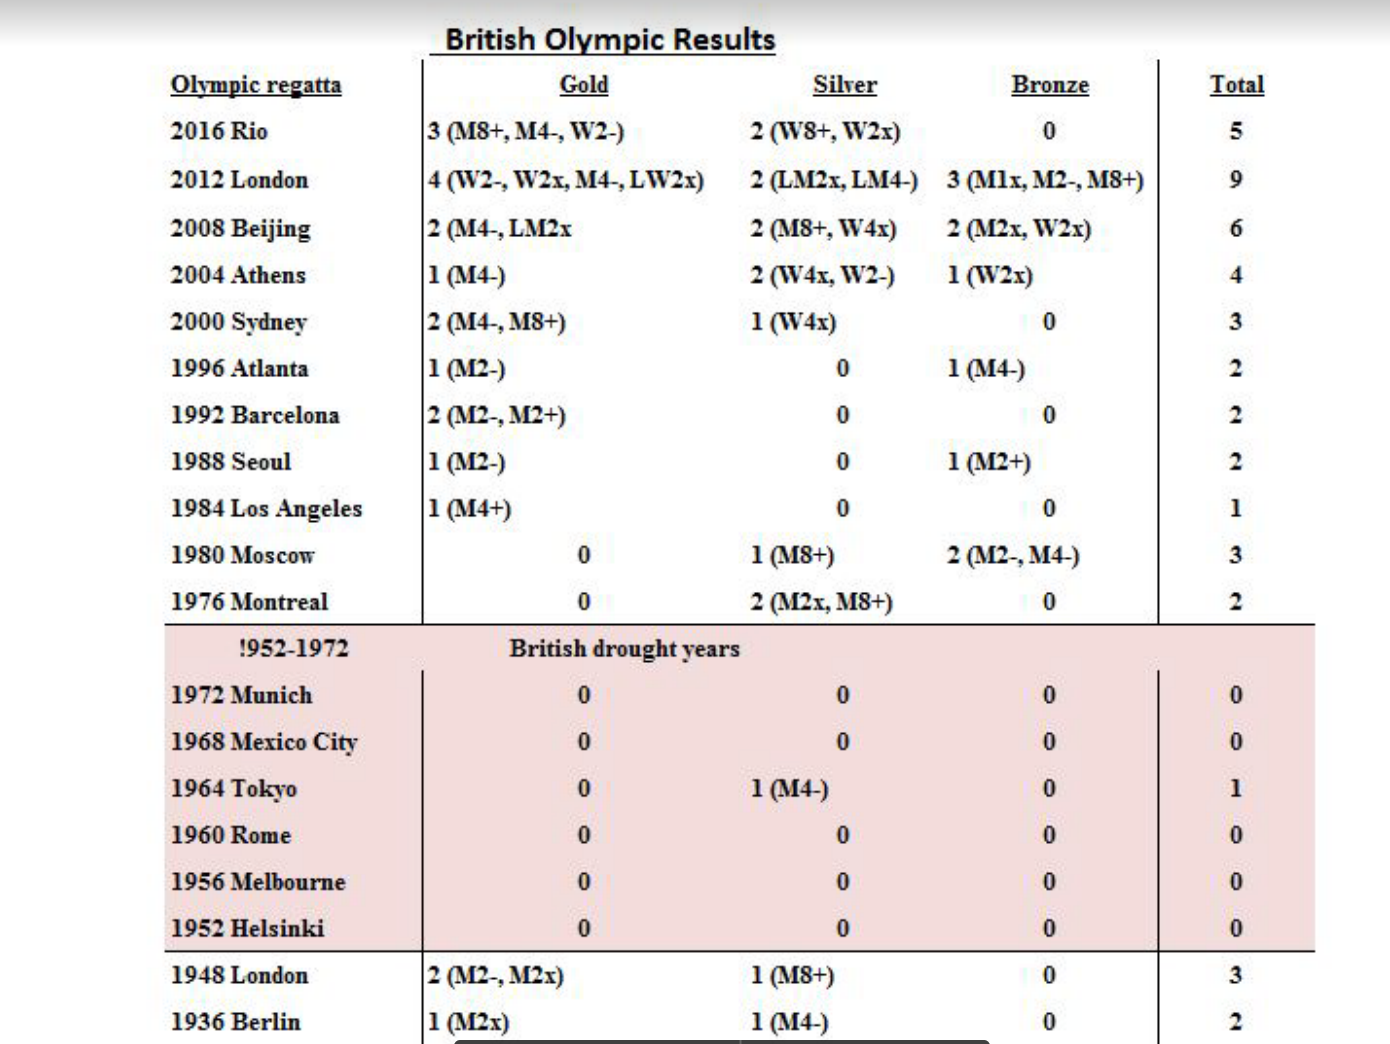 British Rowing "drought" of Olympic medals